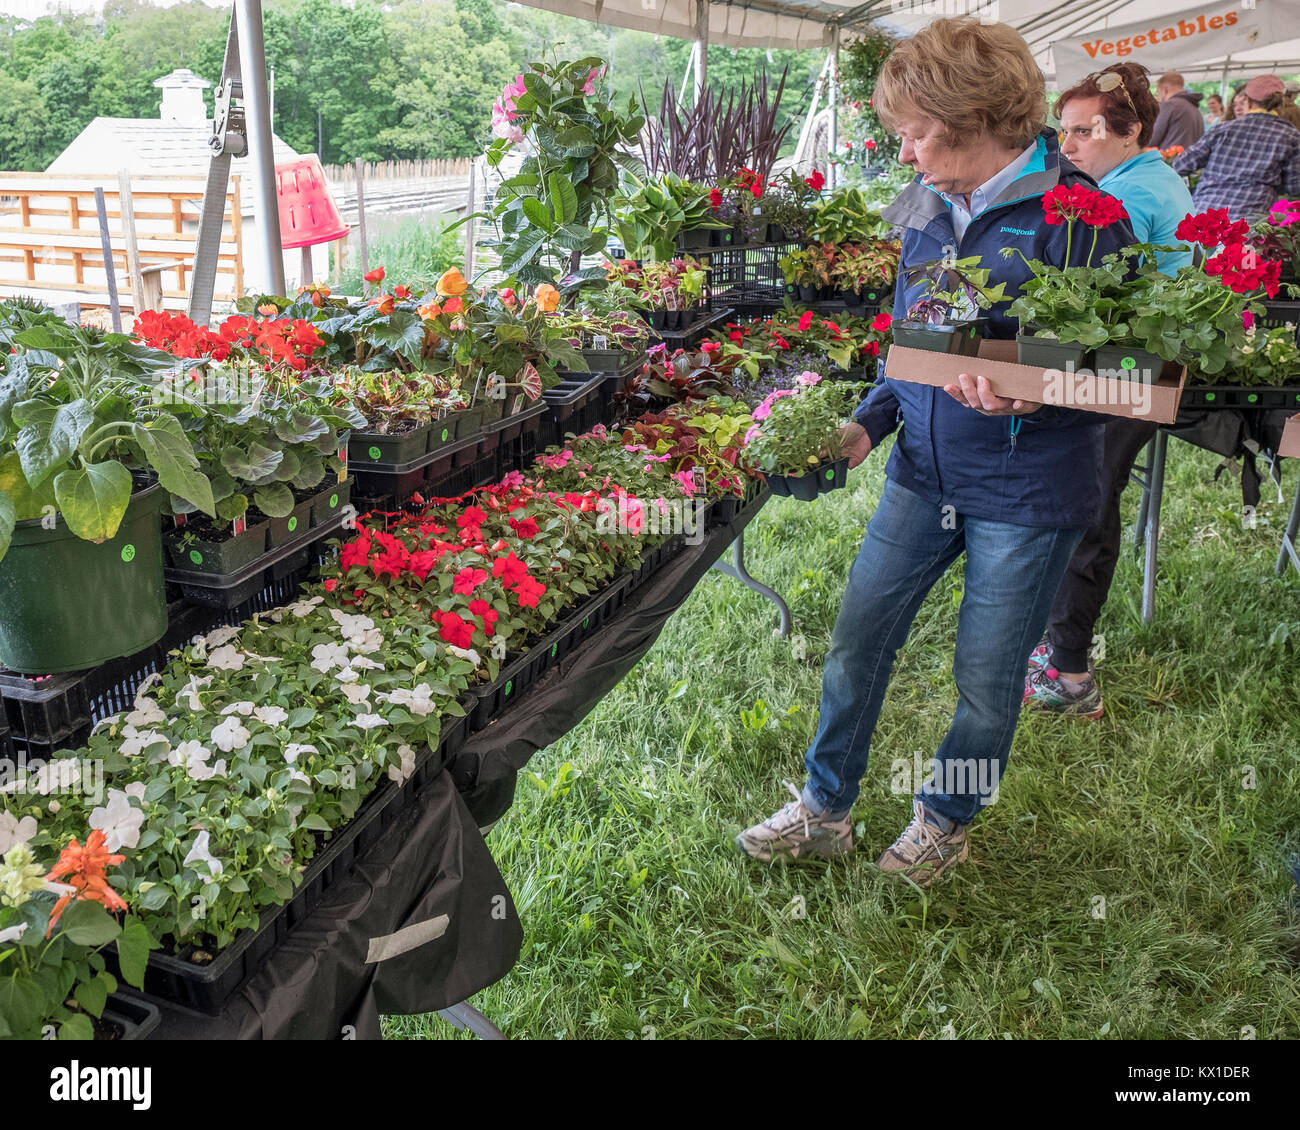 A woman with a box of flowers that she is buying Stock Photo